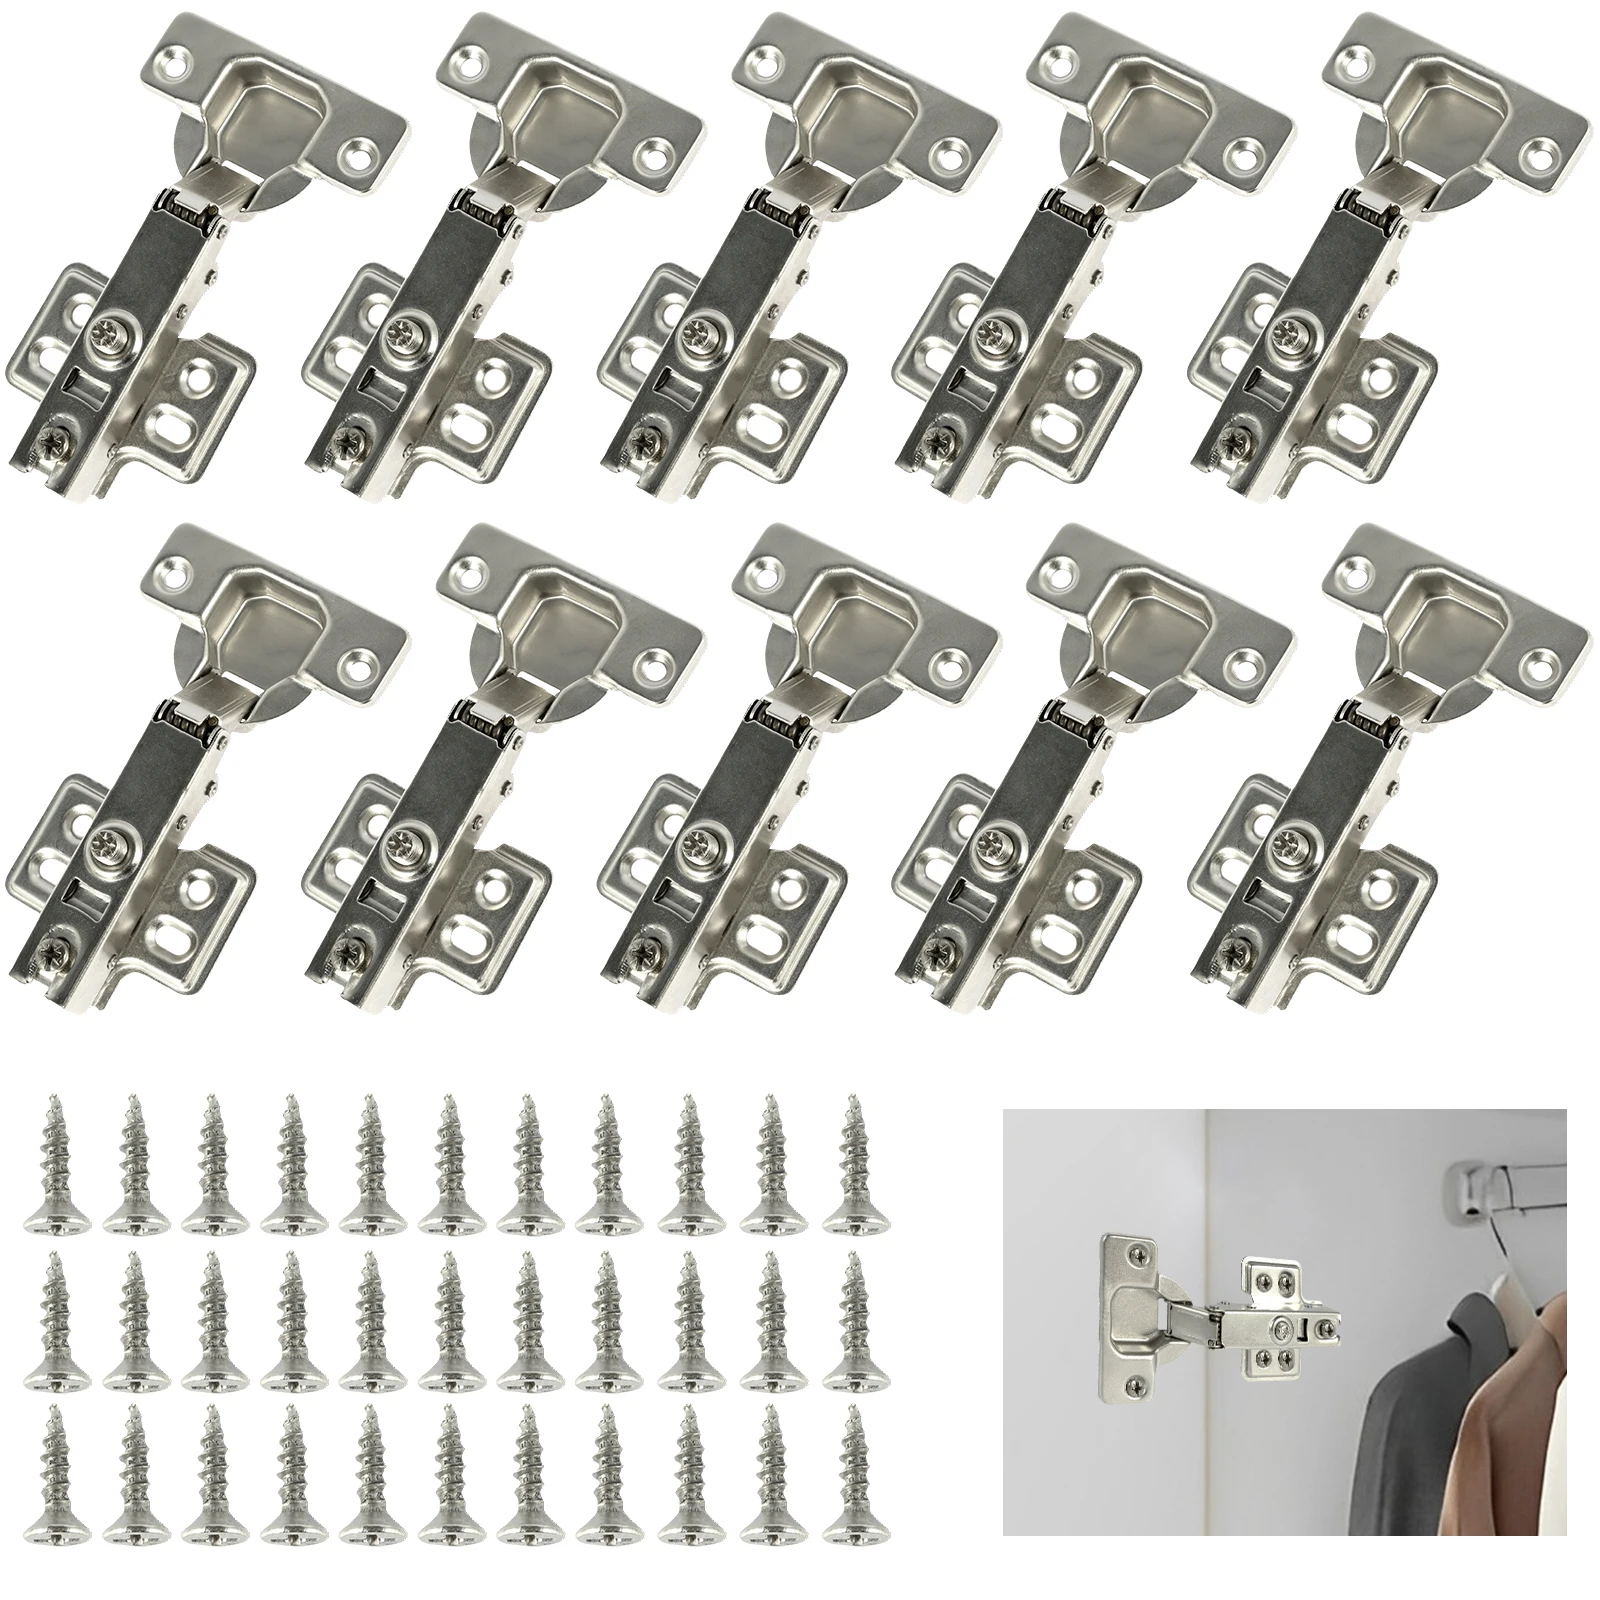 

10Pcs Cupboard Hinges Full Overlay Mute Cabinet Door Hinges Set with Screws Cold Rolled Steel Soft Close Hinges 95°-105° Opening